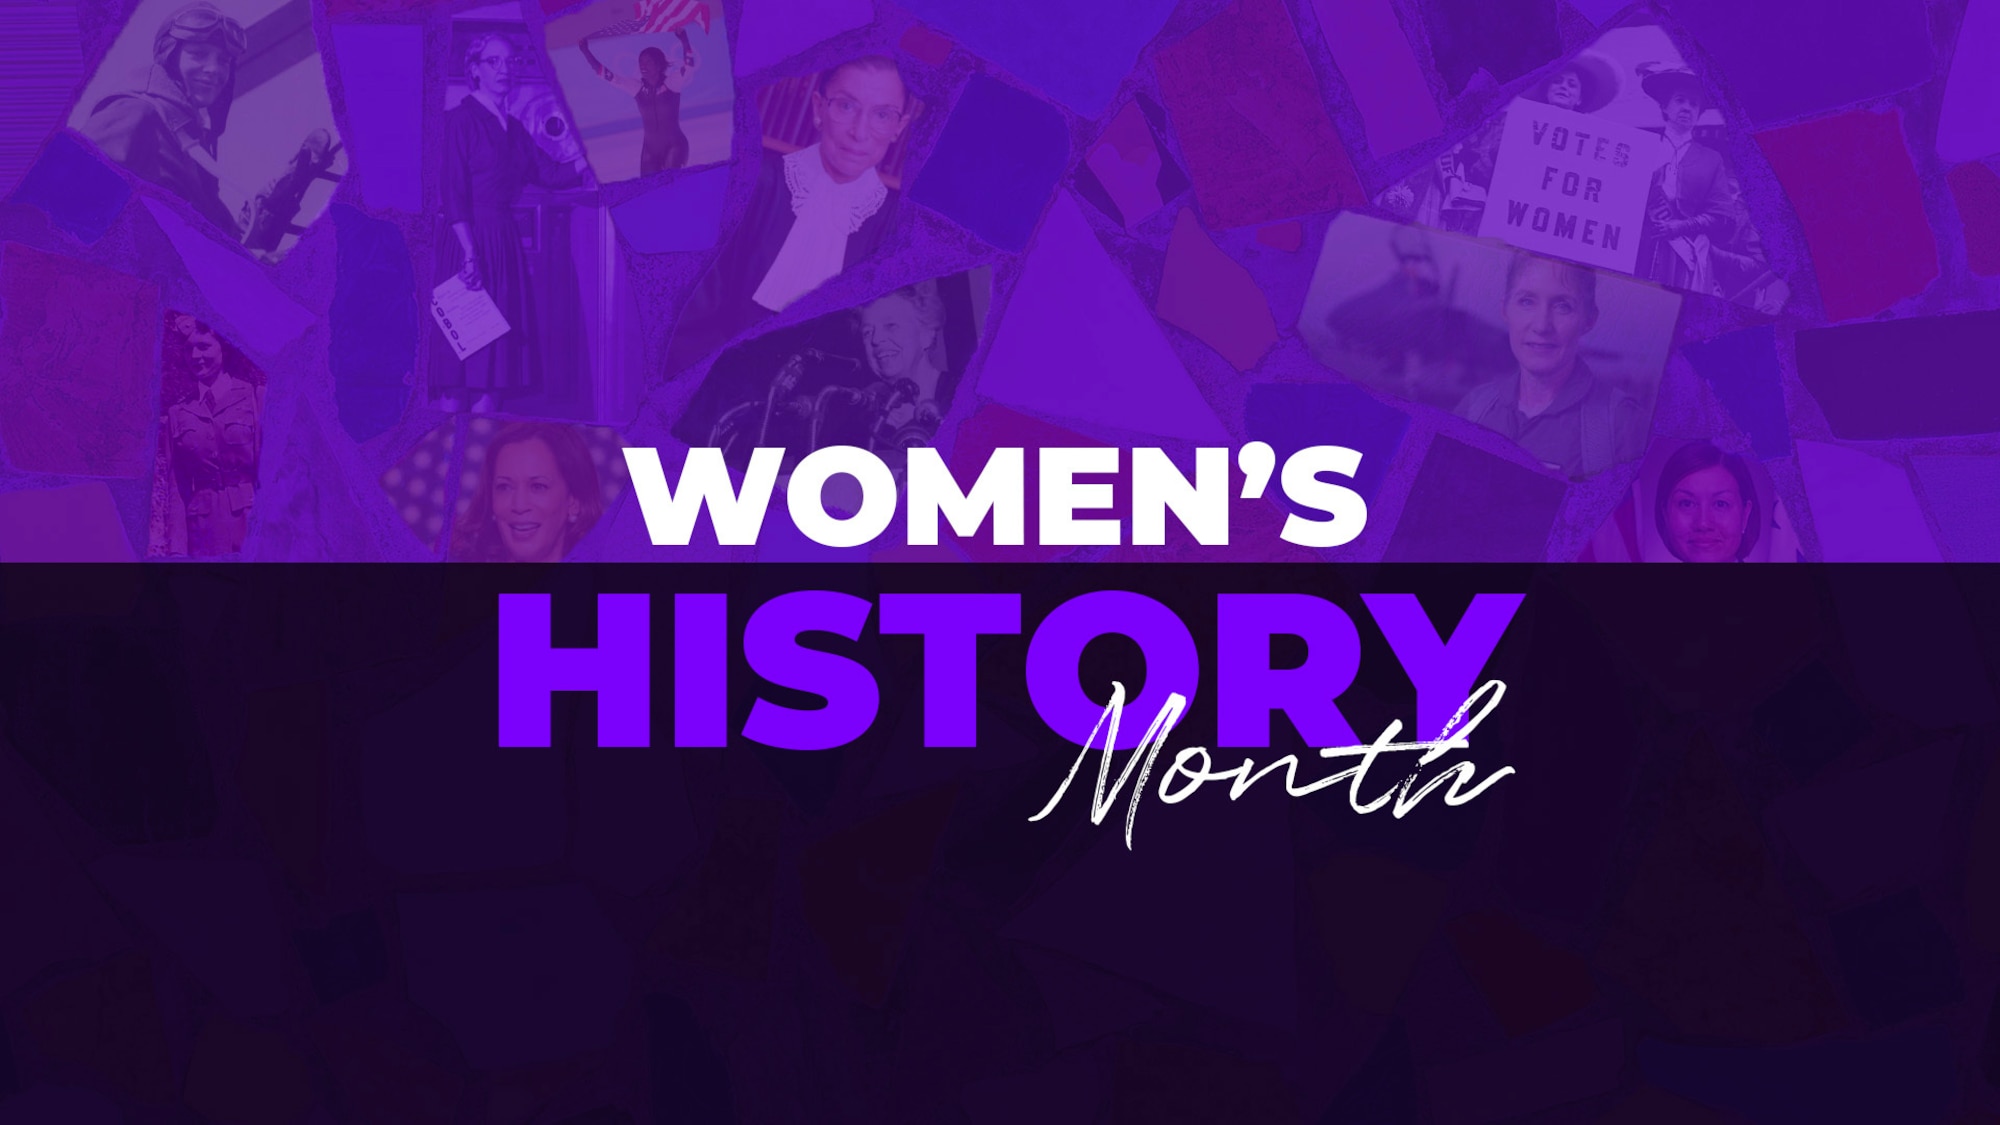 The words "Women's History Month" over a shattered, purple stained-glassed image with the images of historically-prominent women in the glass pieces.